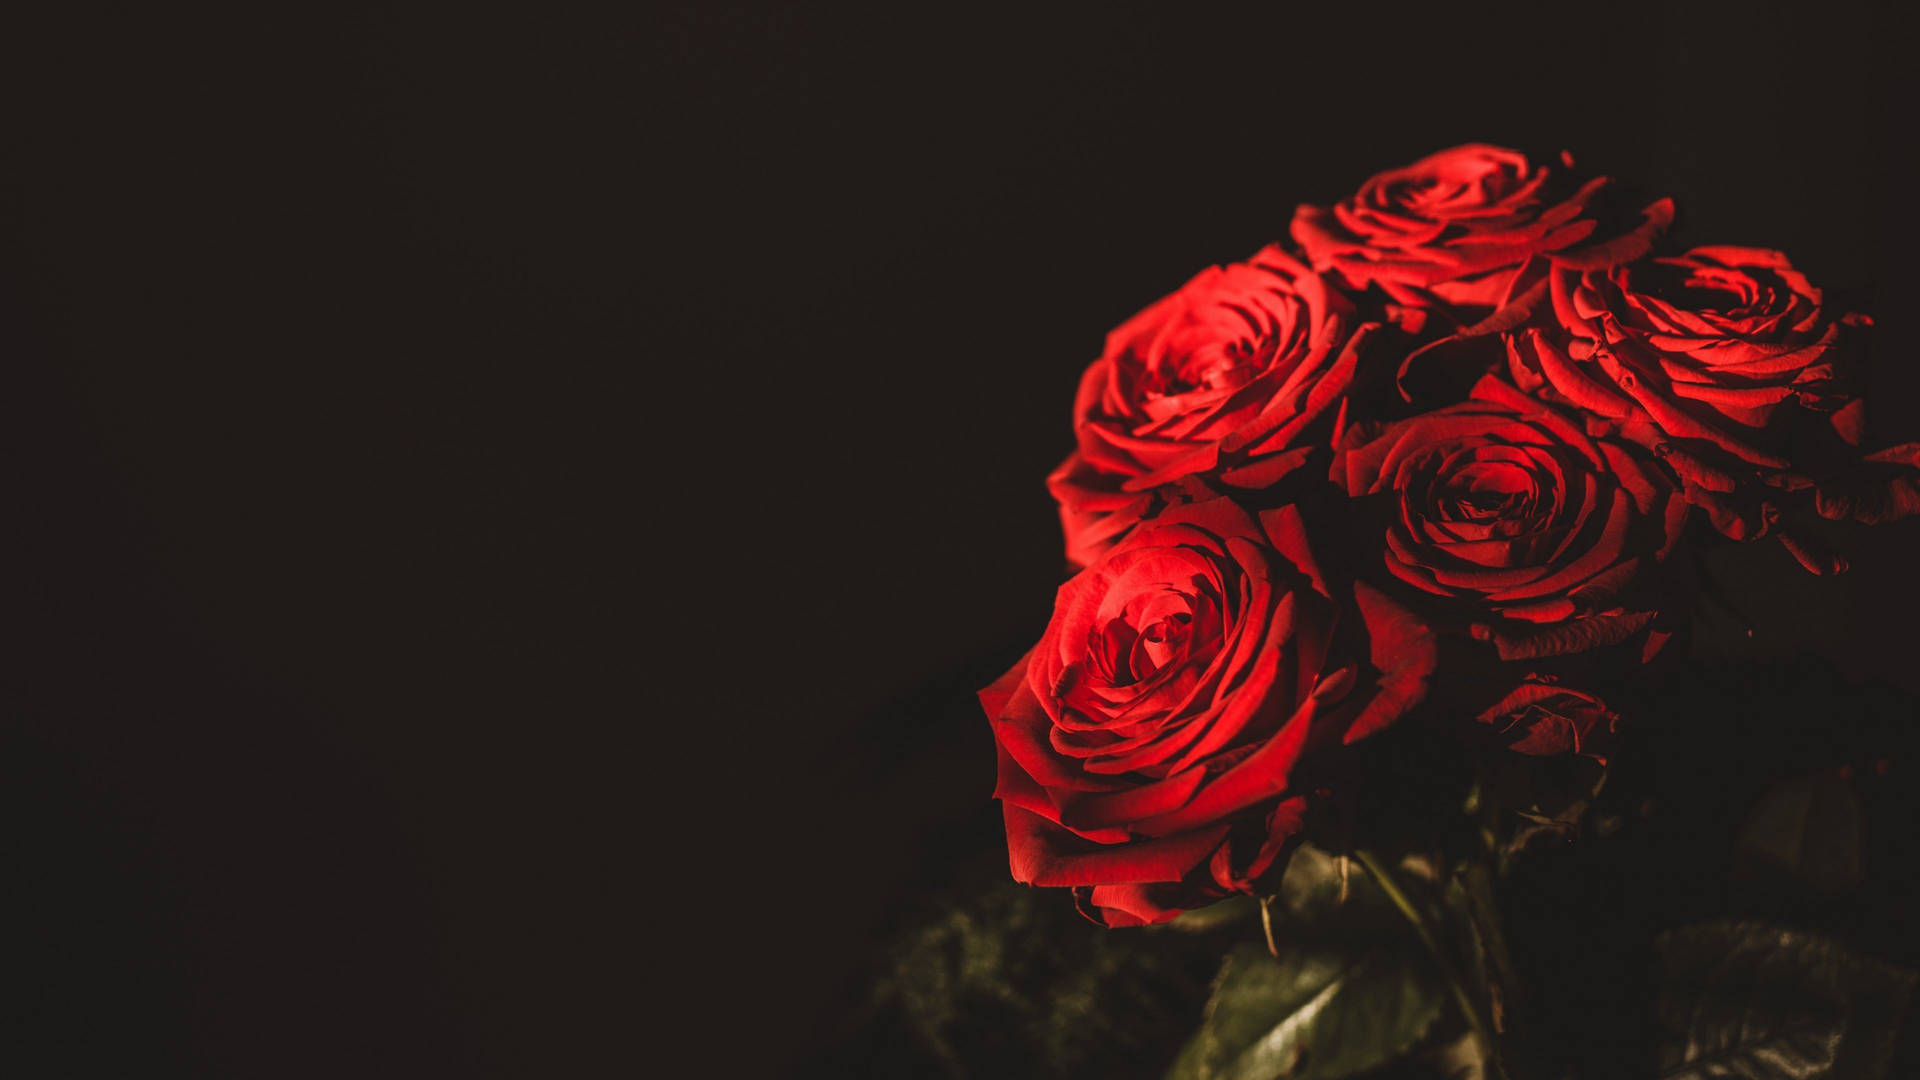 Enjoy The Beauty Of Roses On Your Desktop Background